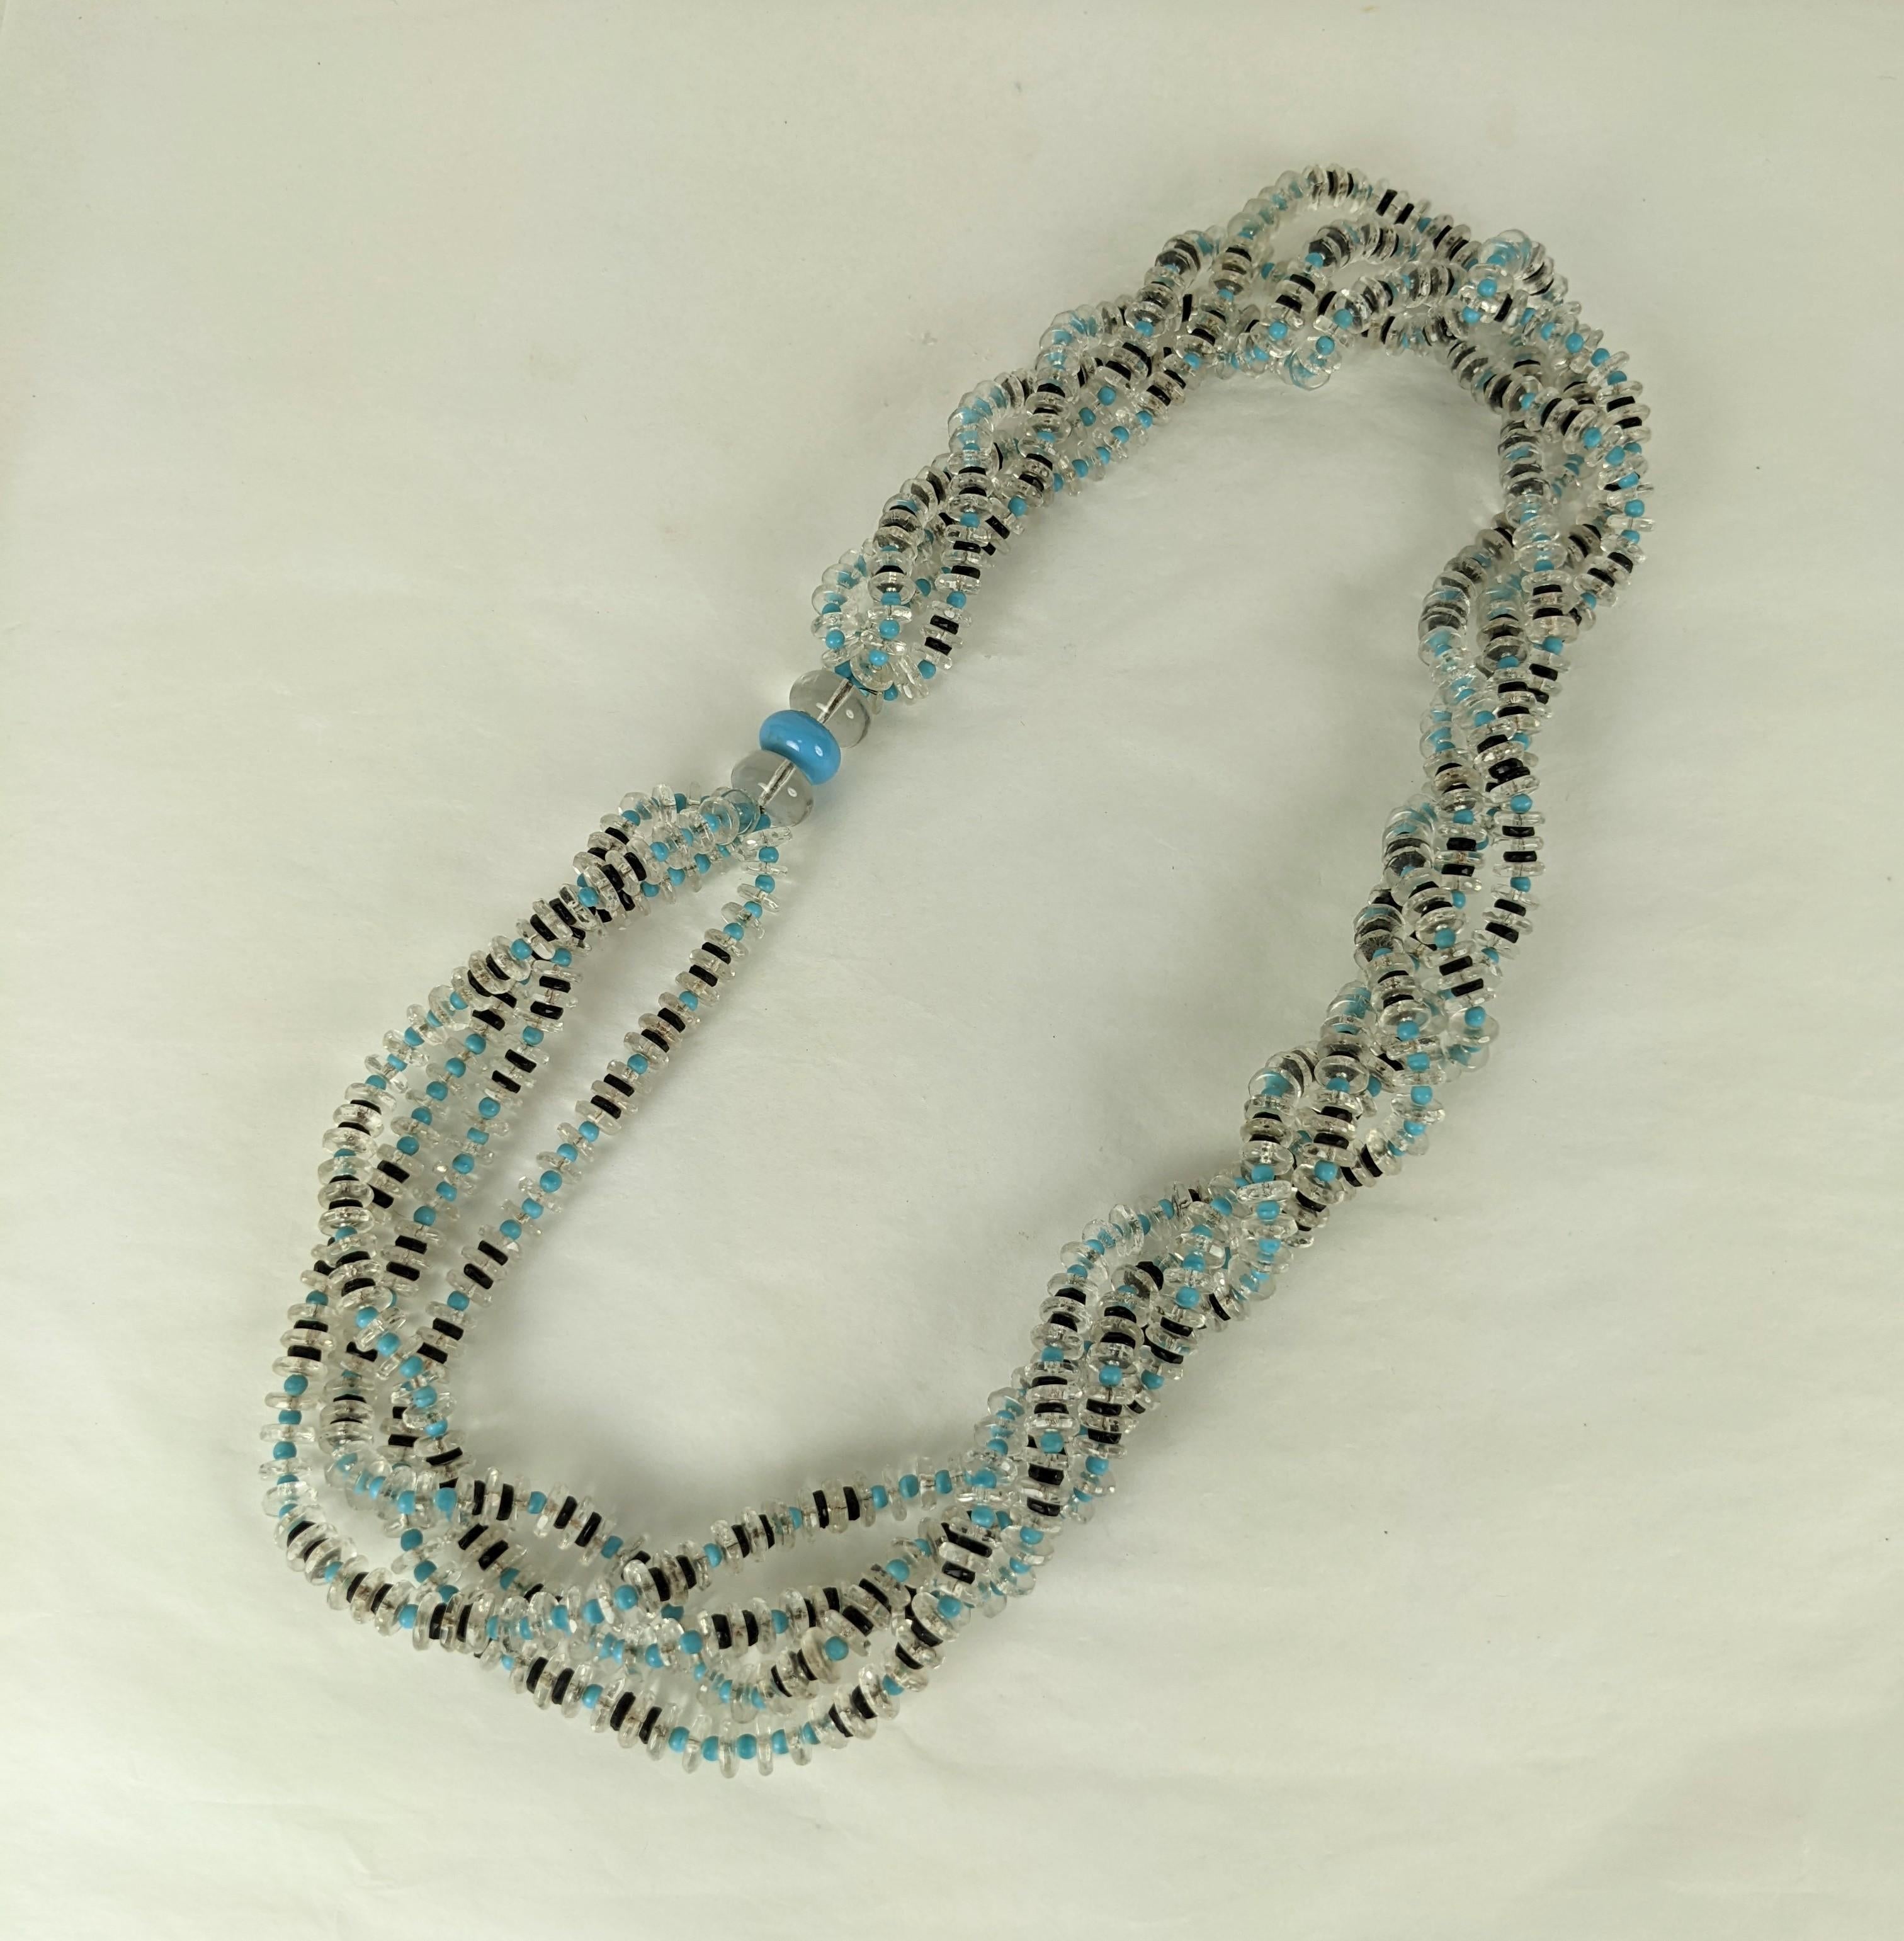 French Art Deco Twisted Crystal Rondel Necklace with turquoise and jet pate de verre spacers which slips over the head. Strands are capped by 3 large crystal and turquoise beads which can be worn at the side or on the back. 
1930's France.  26